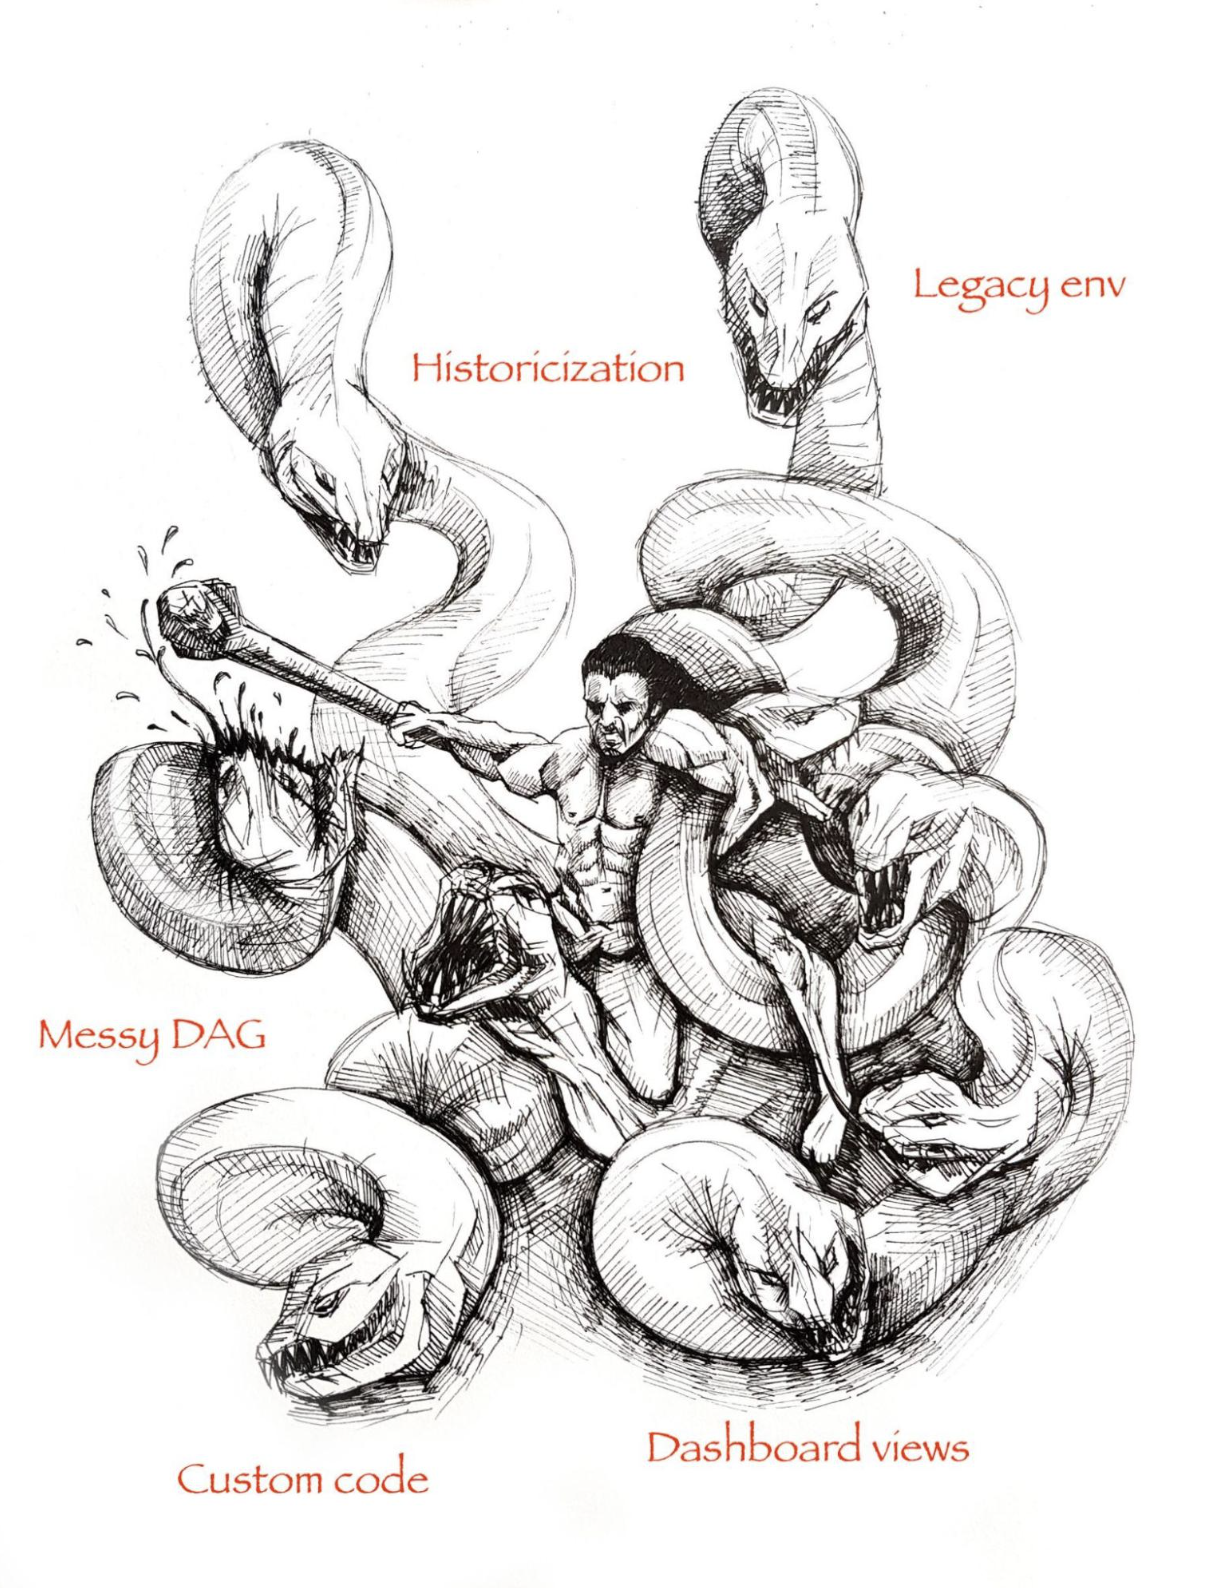 Metaphorical picture with Hercules fighting Hydra